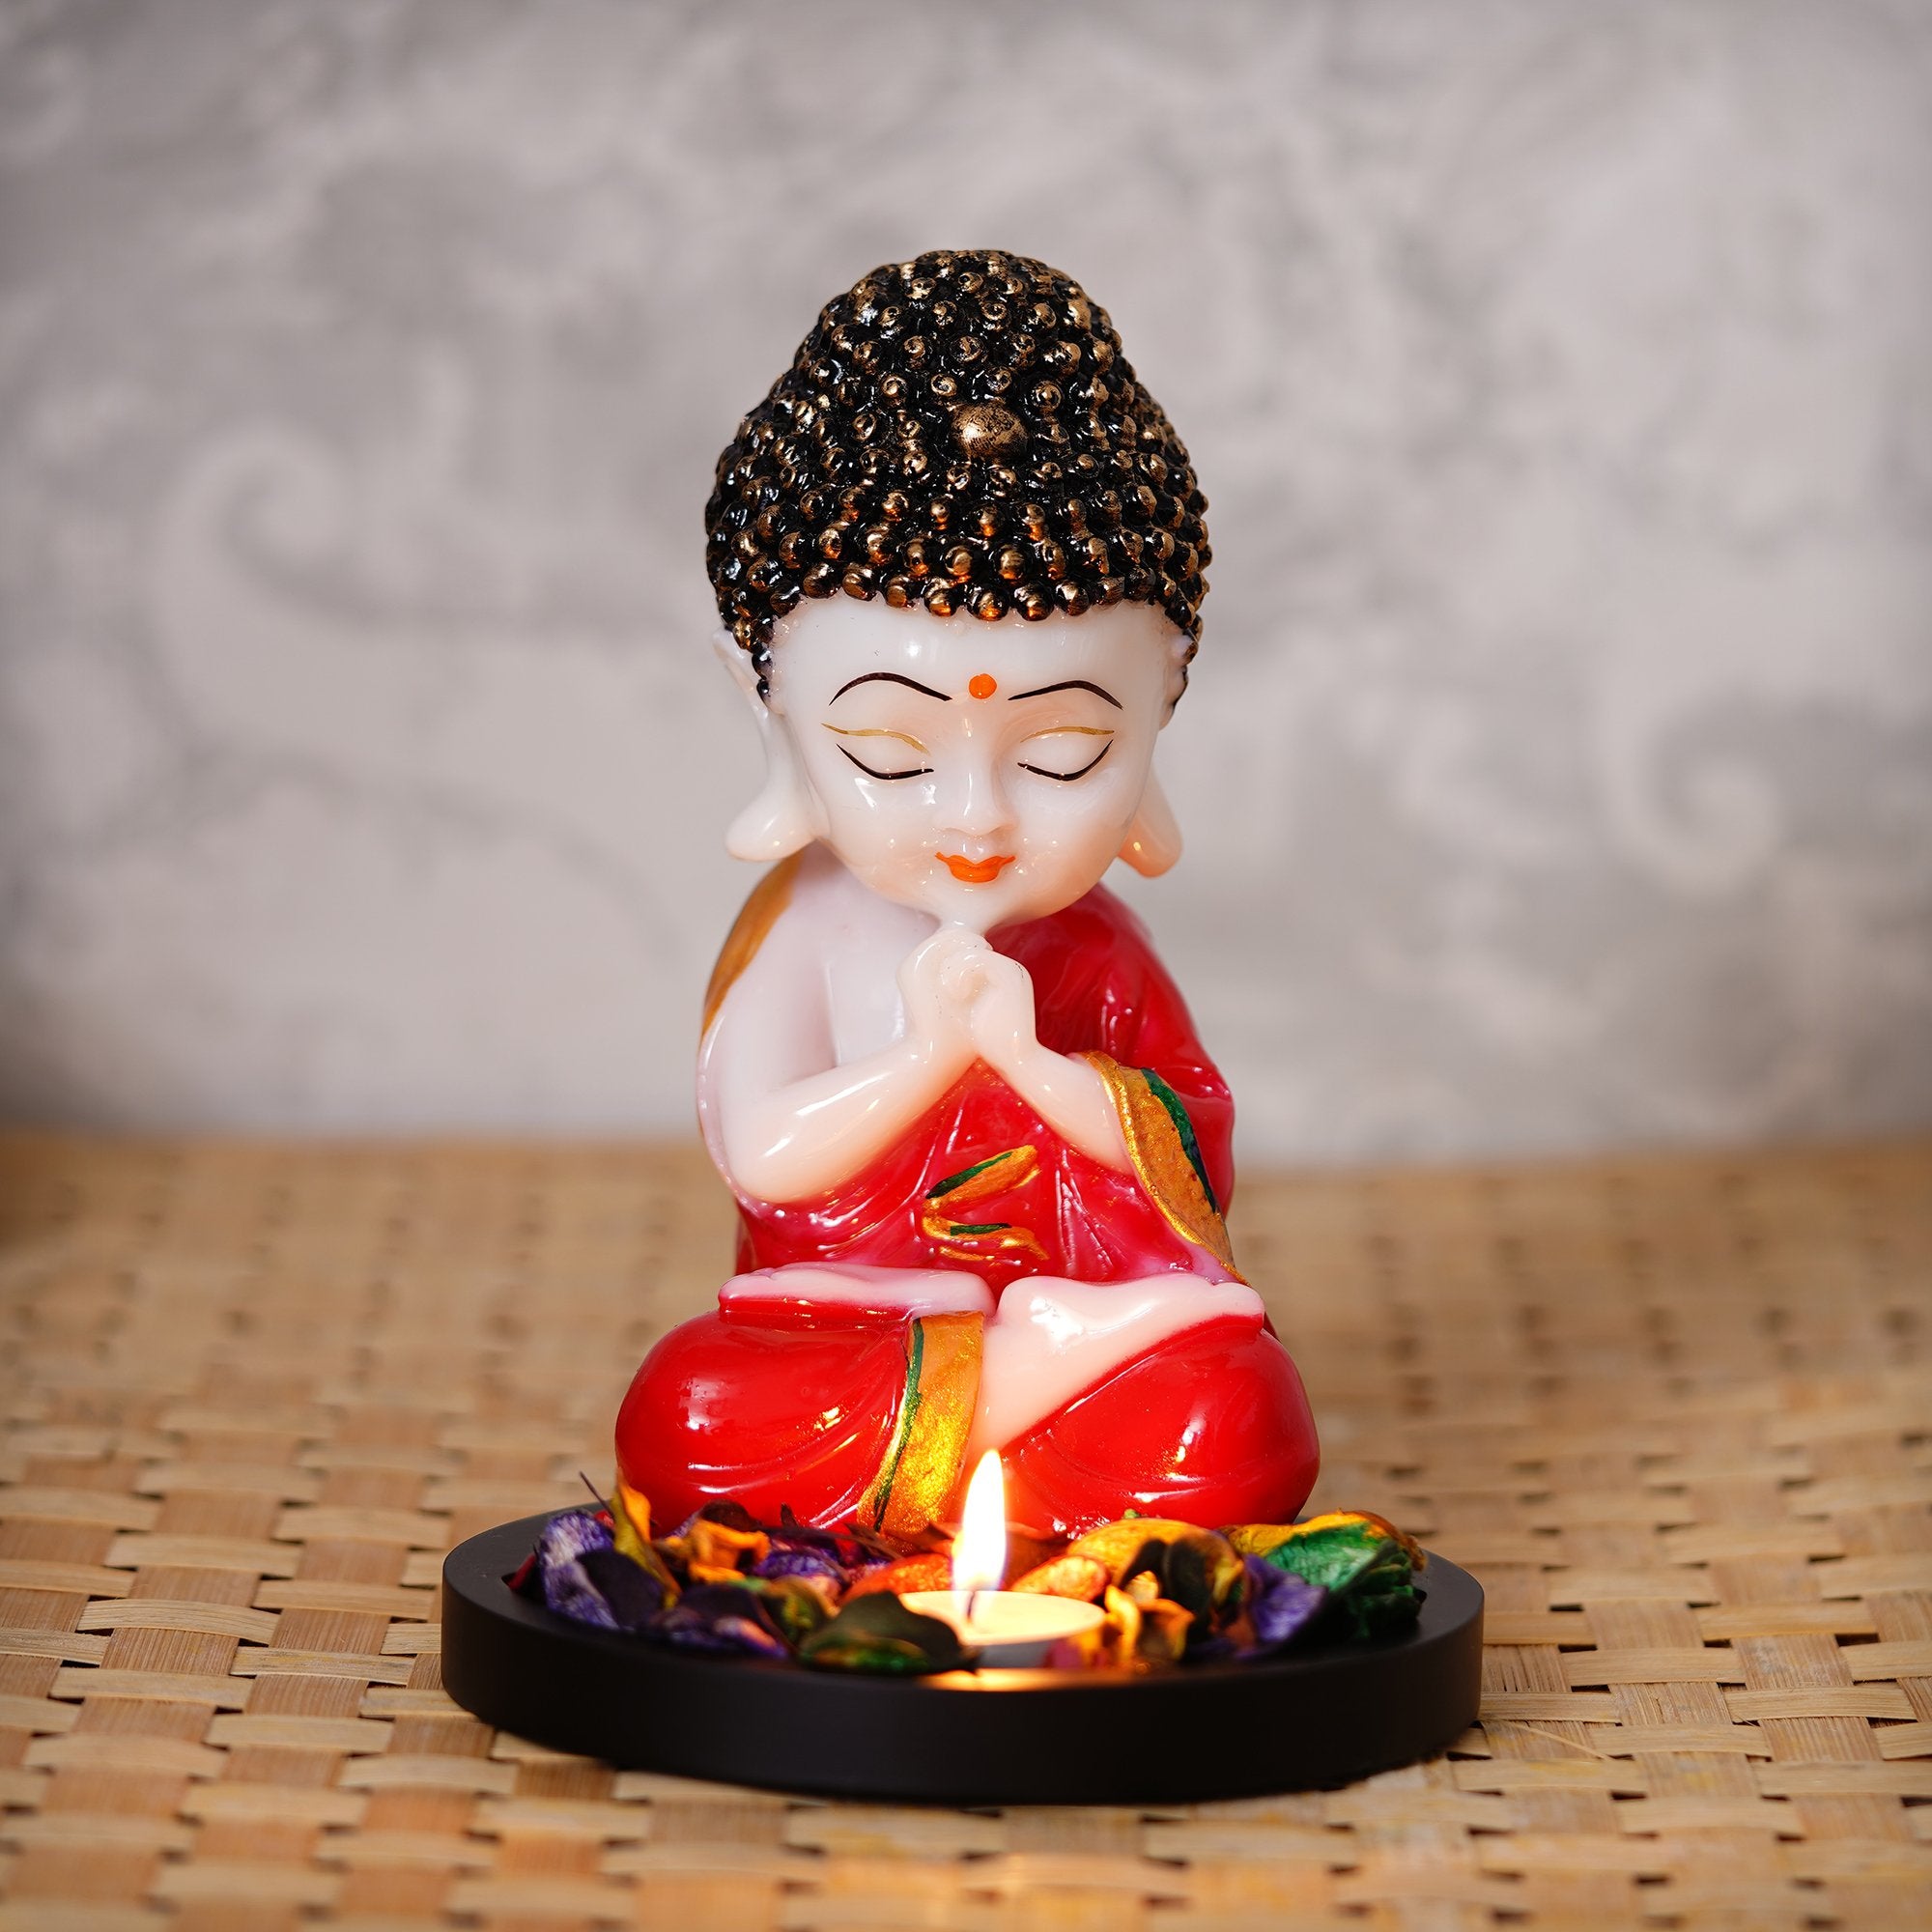 Designer Peacock Rakhi with Praying Red Monk Buddha with Wooden Base, Fragranced Petals and Tealight and Roli Chawal Pack, Best Wishes Greeting Card 2